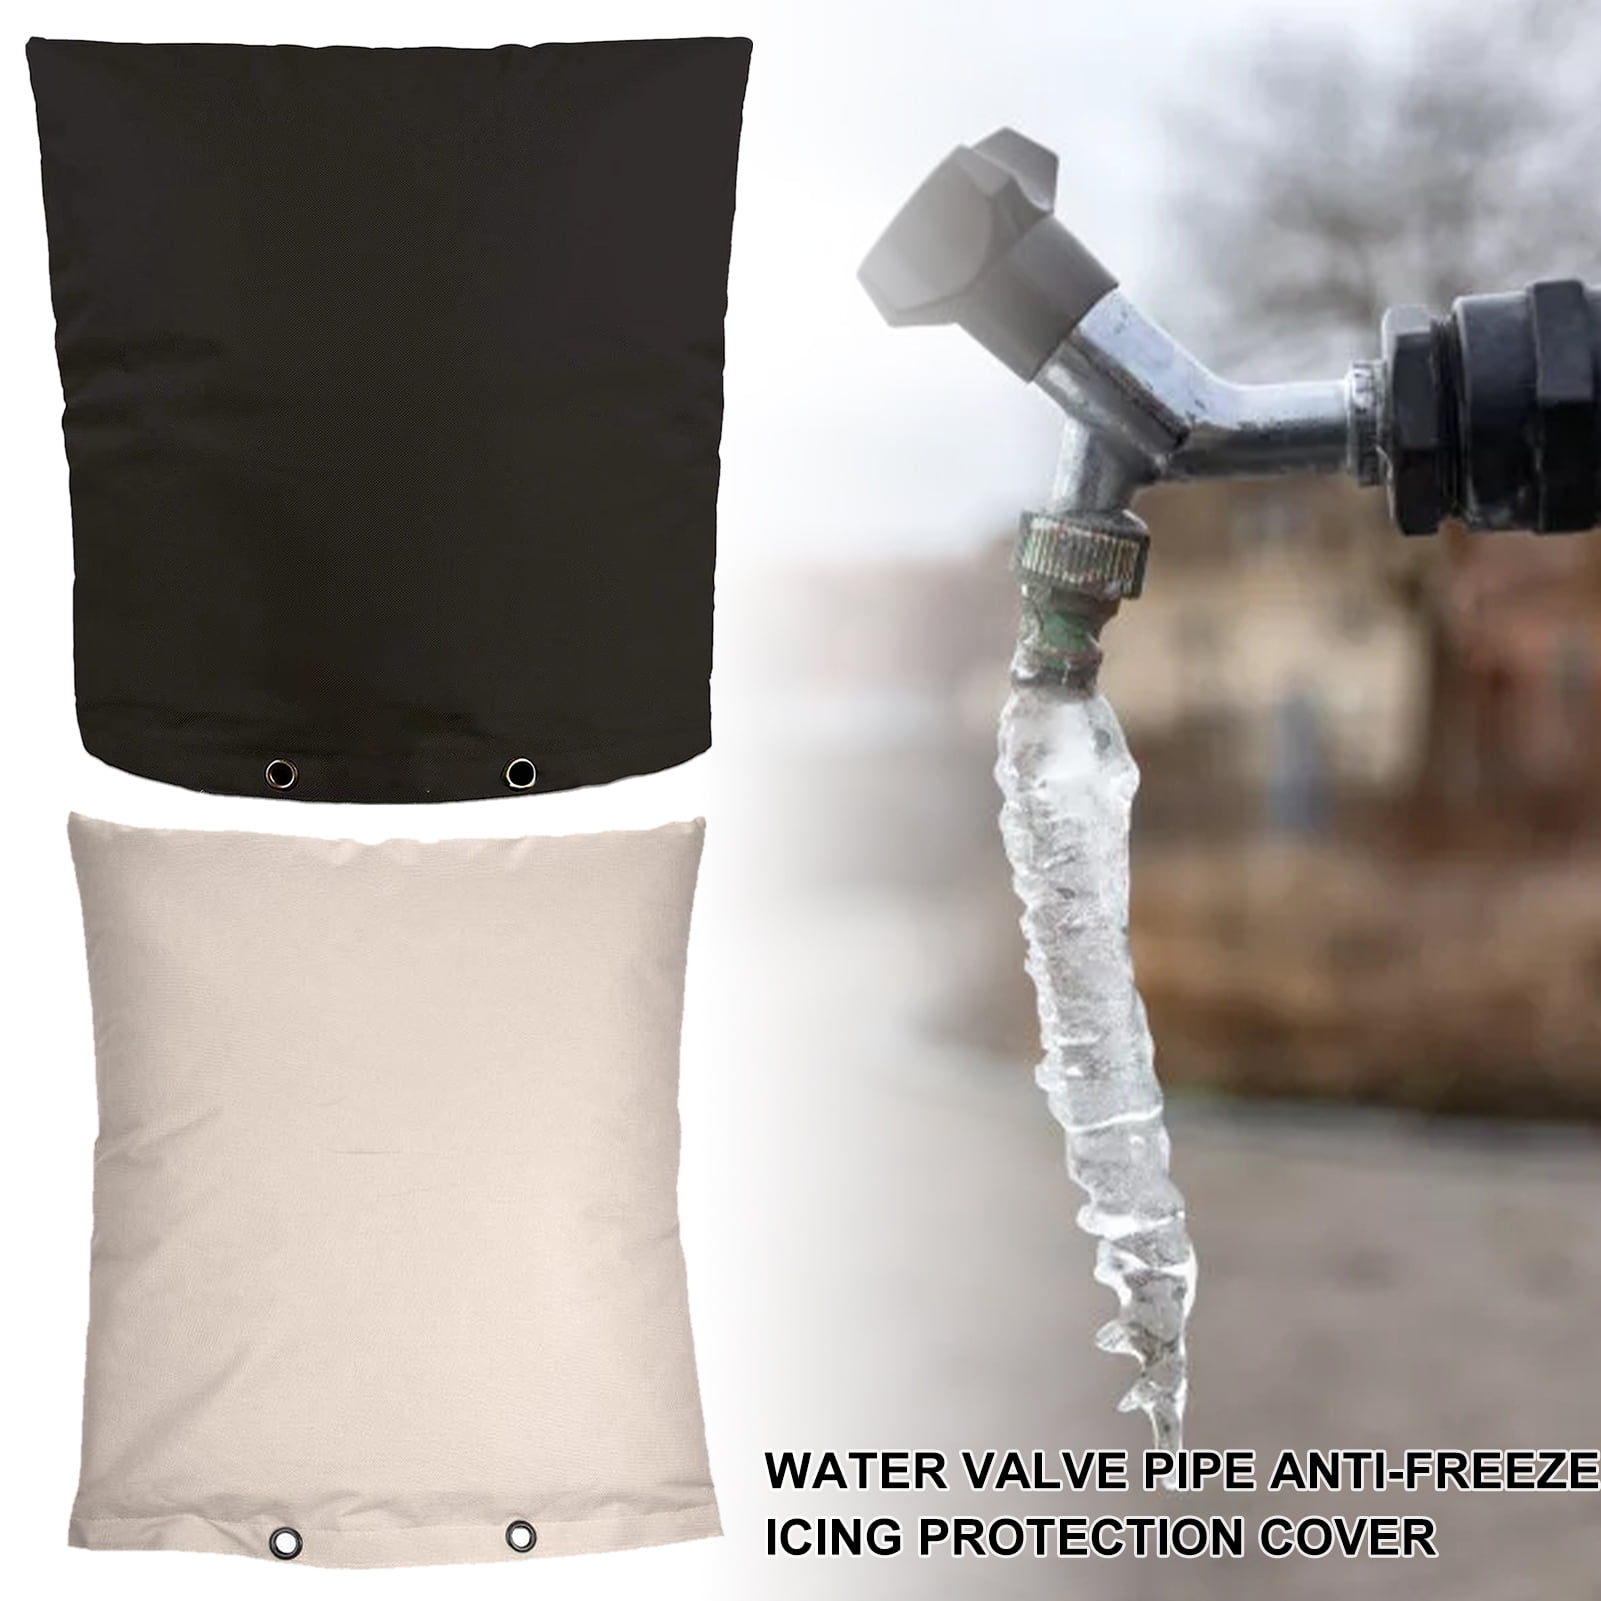 Water Faucet Tap Cover Sock Freeze Protection For Winter Cold Weather Outdoor 